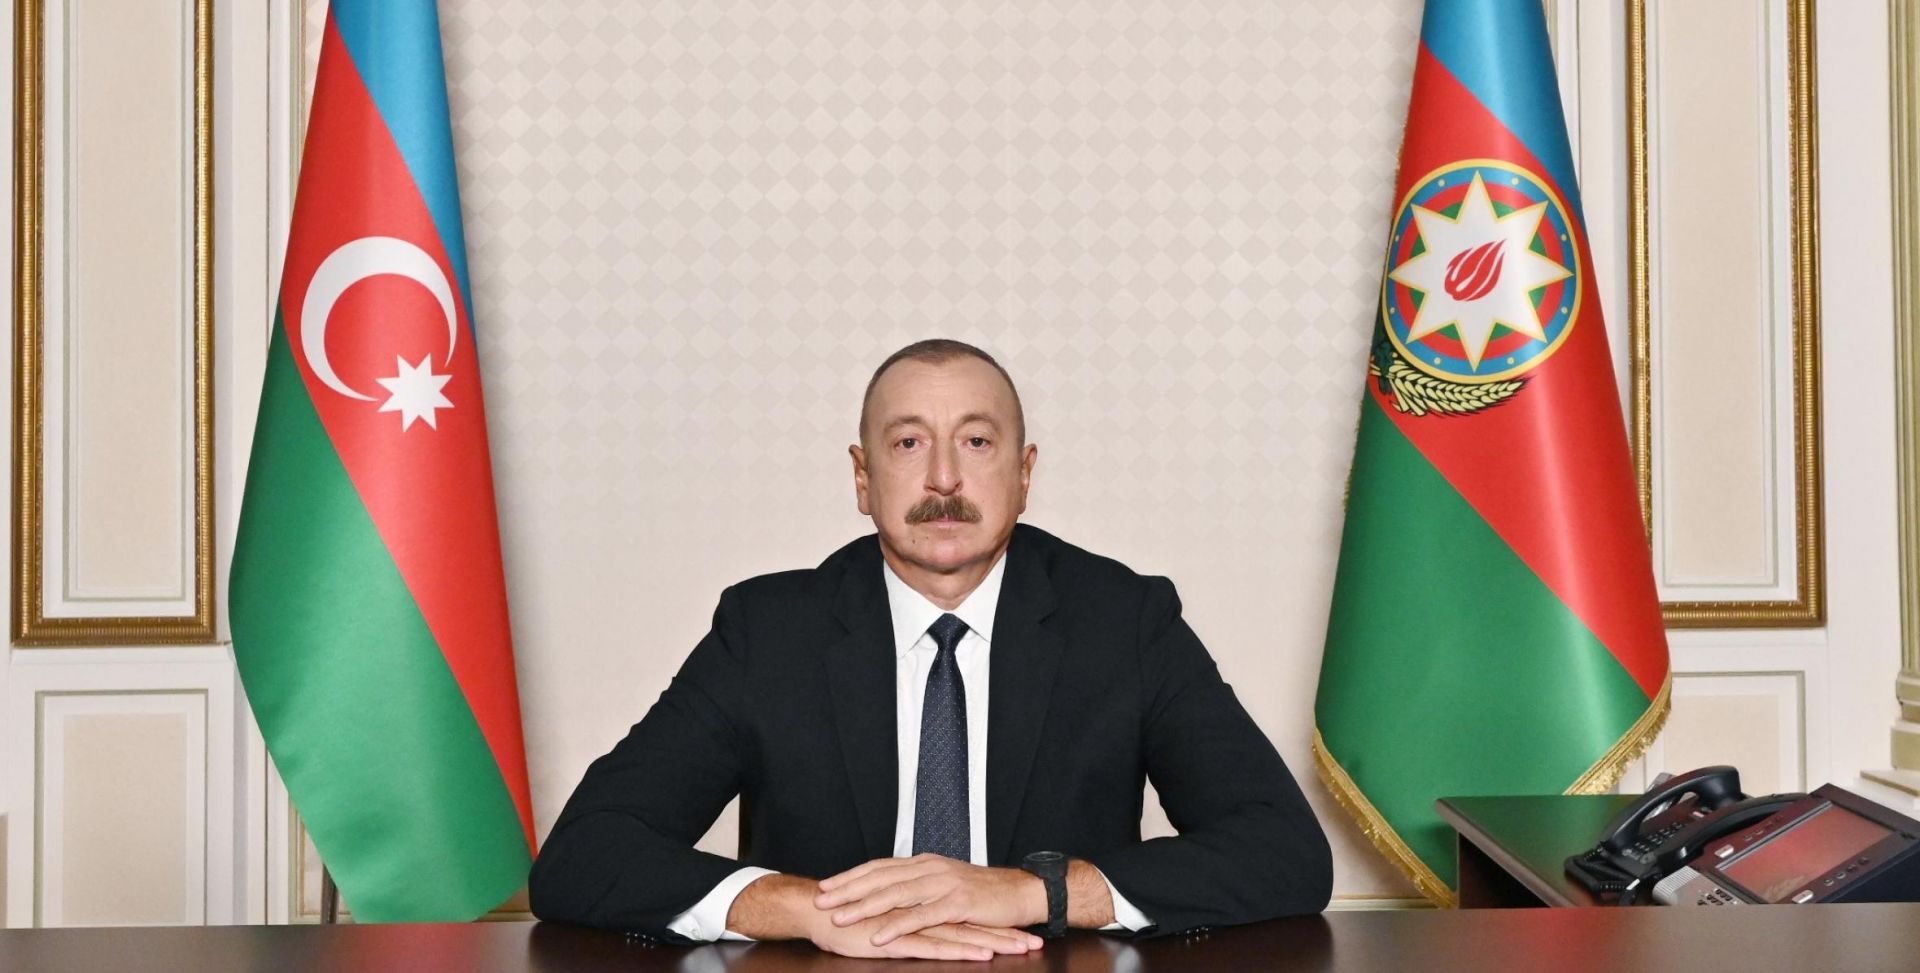 Azerbaijani President makes post on his social media accounts on occasion of 4 April - International Day for Mine Awareness and Assistance in Mine Action